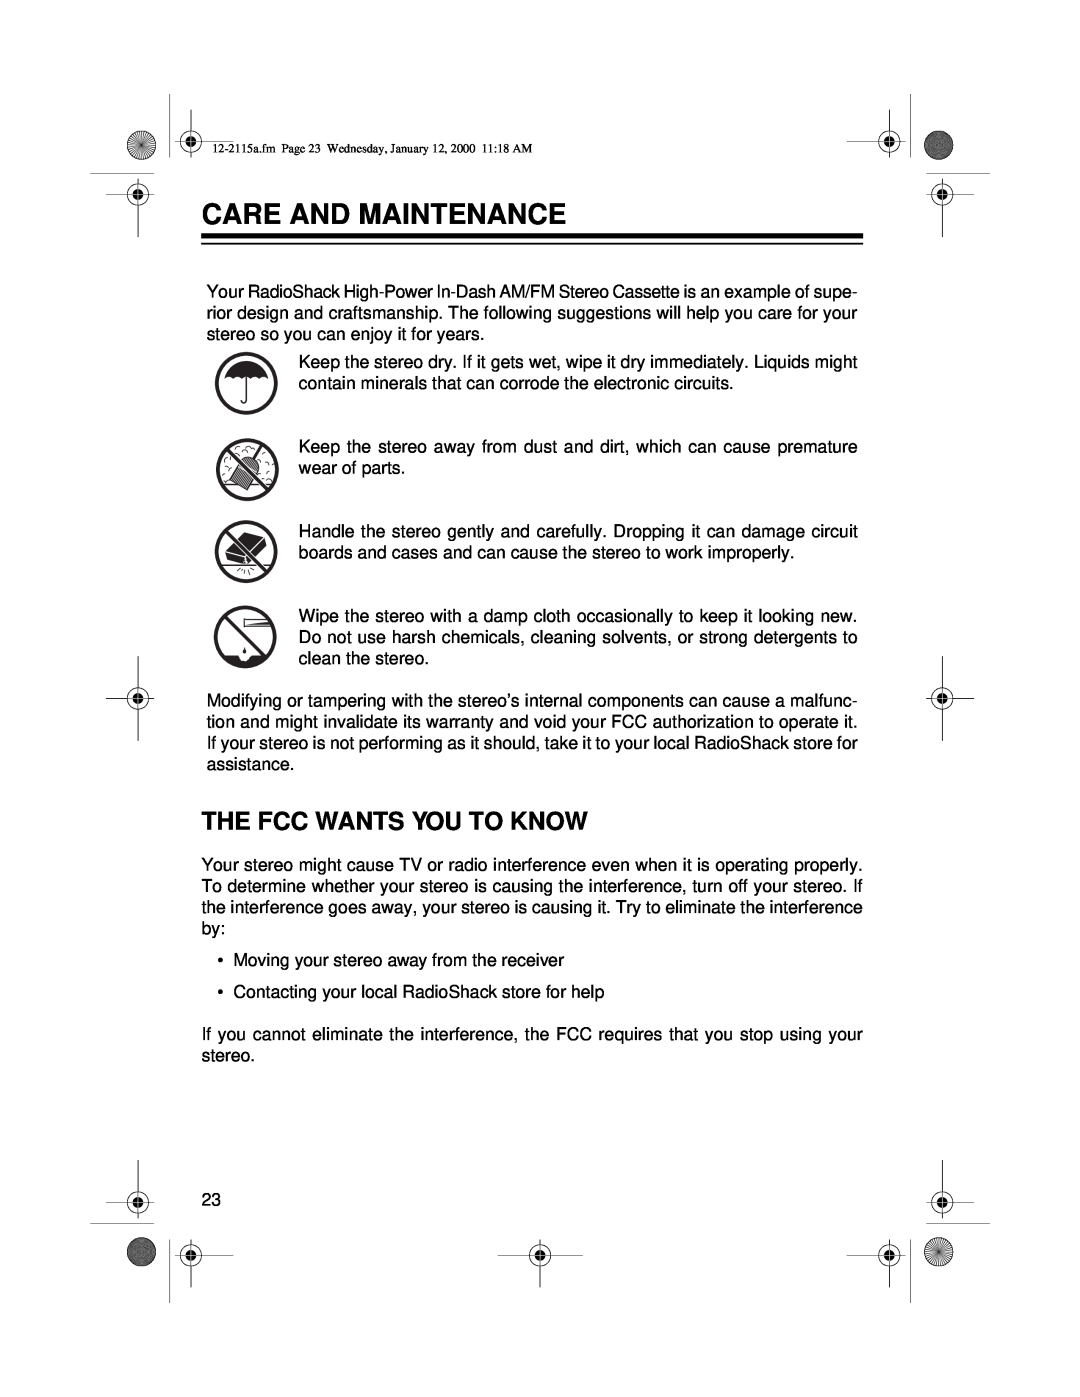 Radio Shack AM/FM Stereo Cassette owner manual Care And Maintenance, The Fcc Wants You To Know 